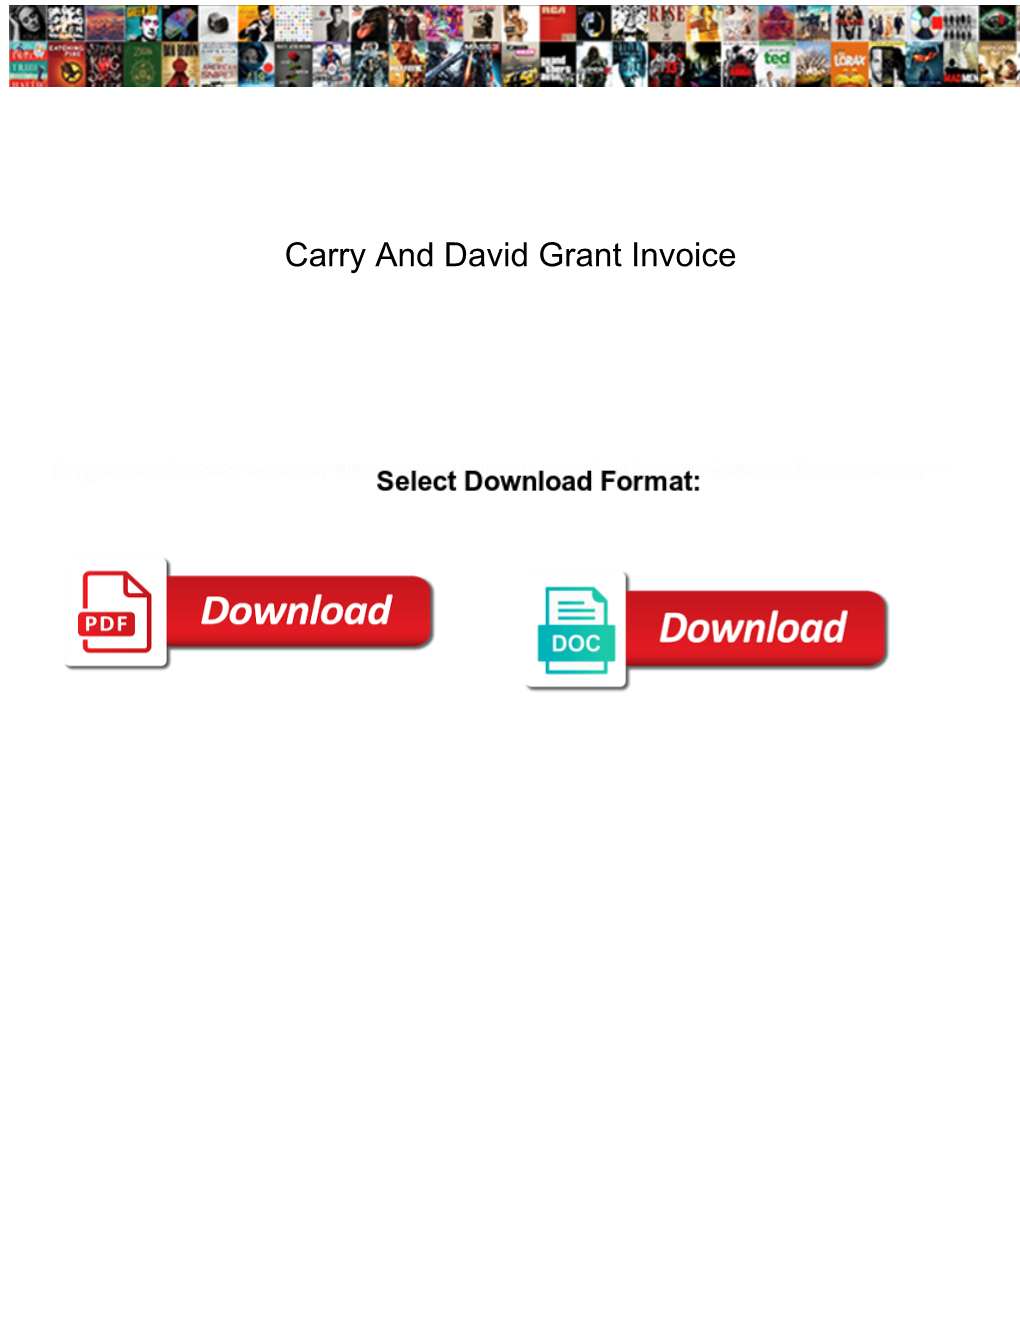 Carry and David Grant Invoice With